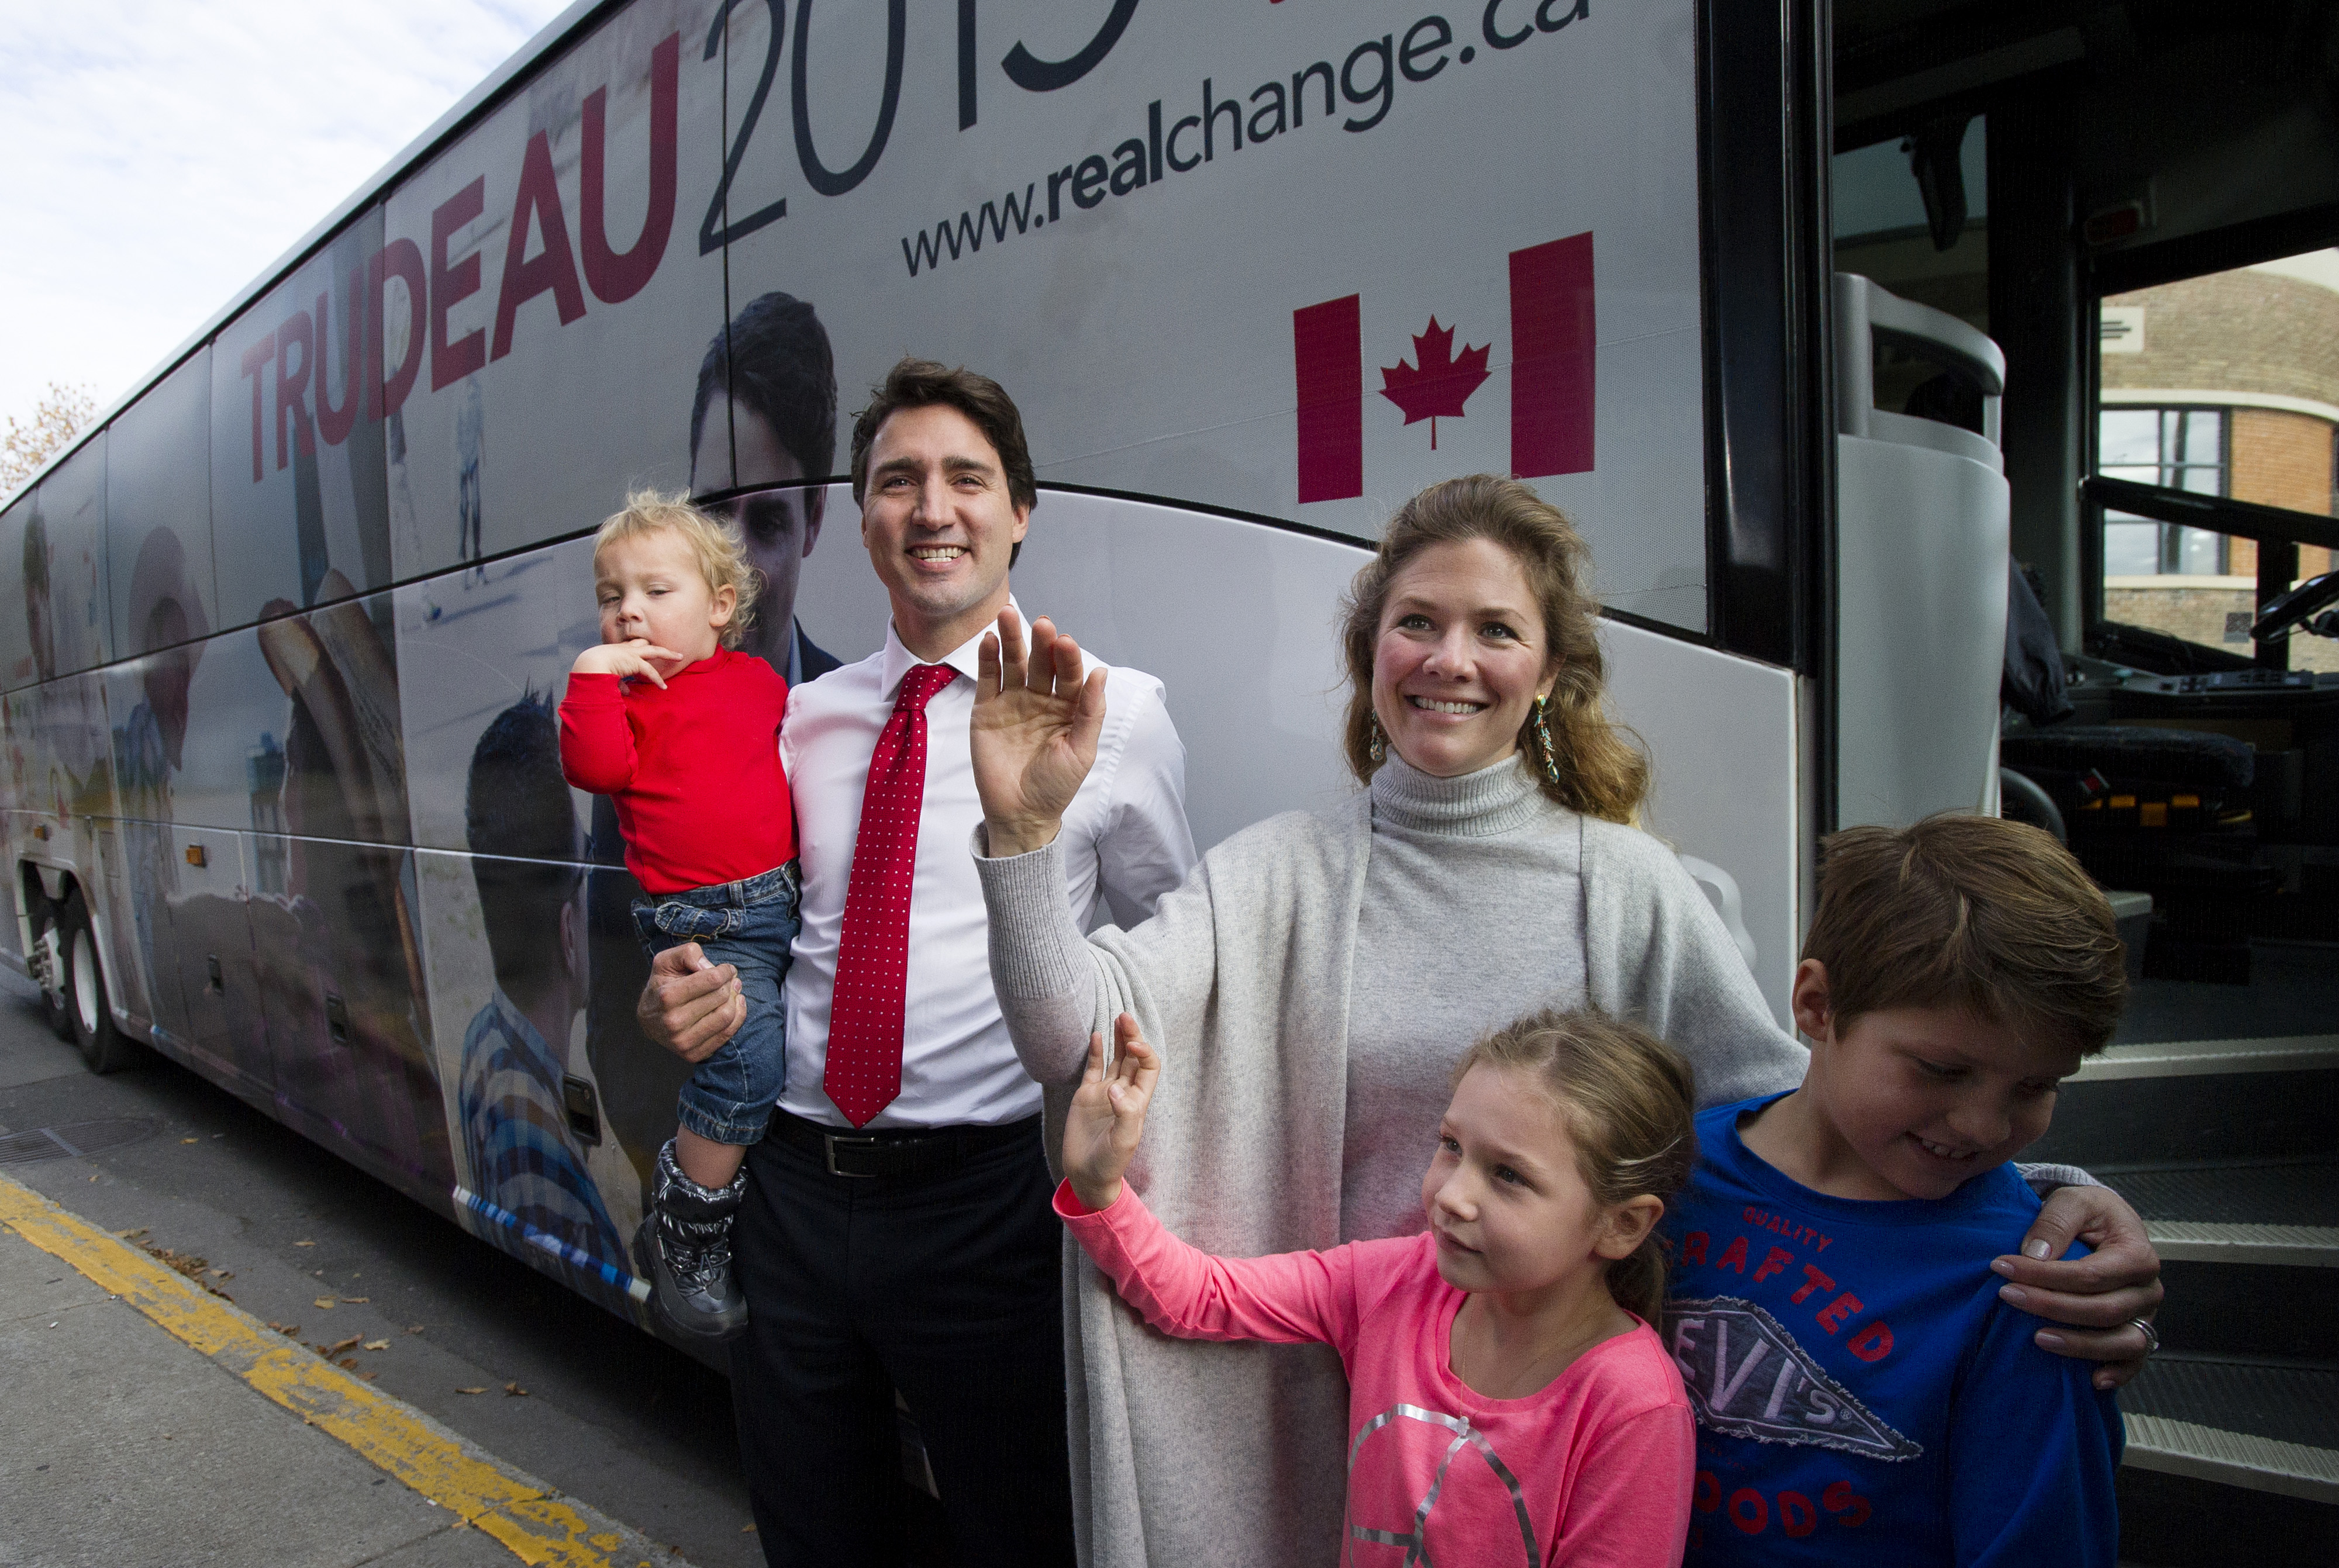 Justin Trudeau and Sophie Gregoire-Trudeau wave with their children on election day in Montreal, on Oct. 19, 2015.